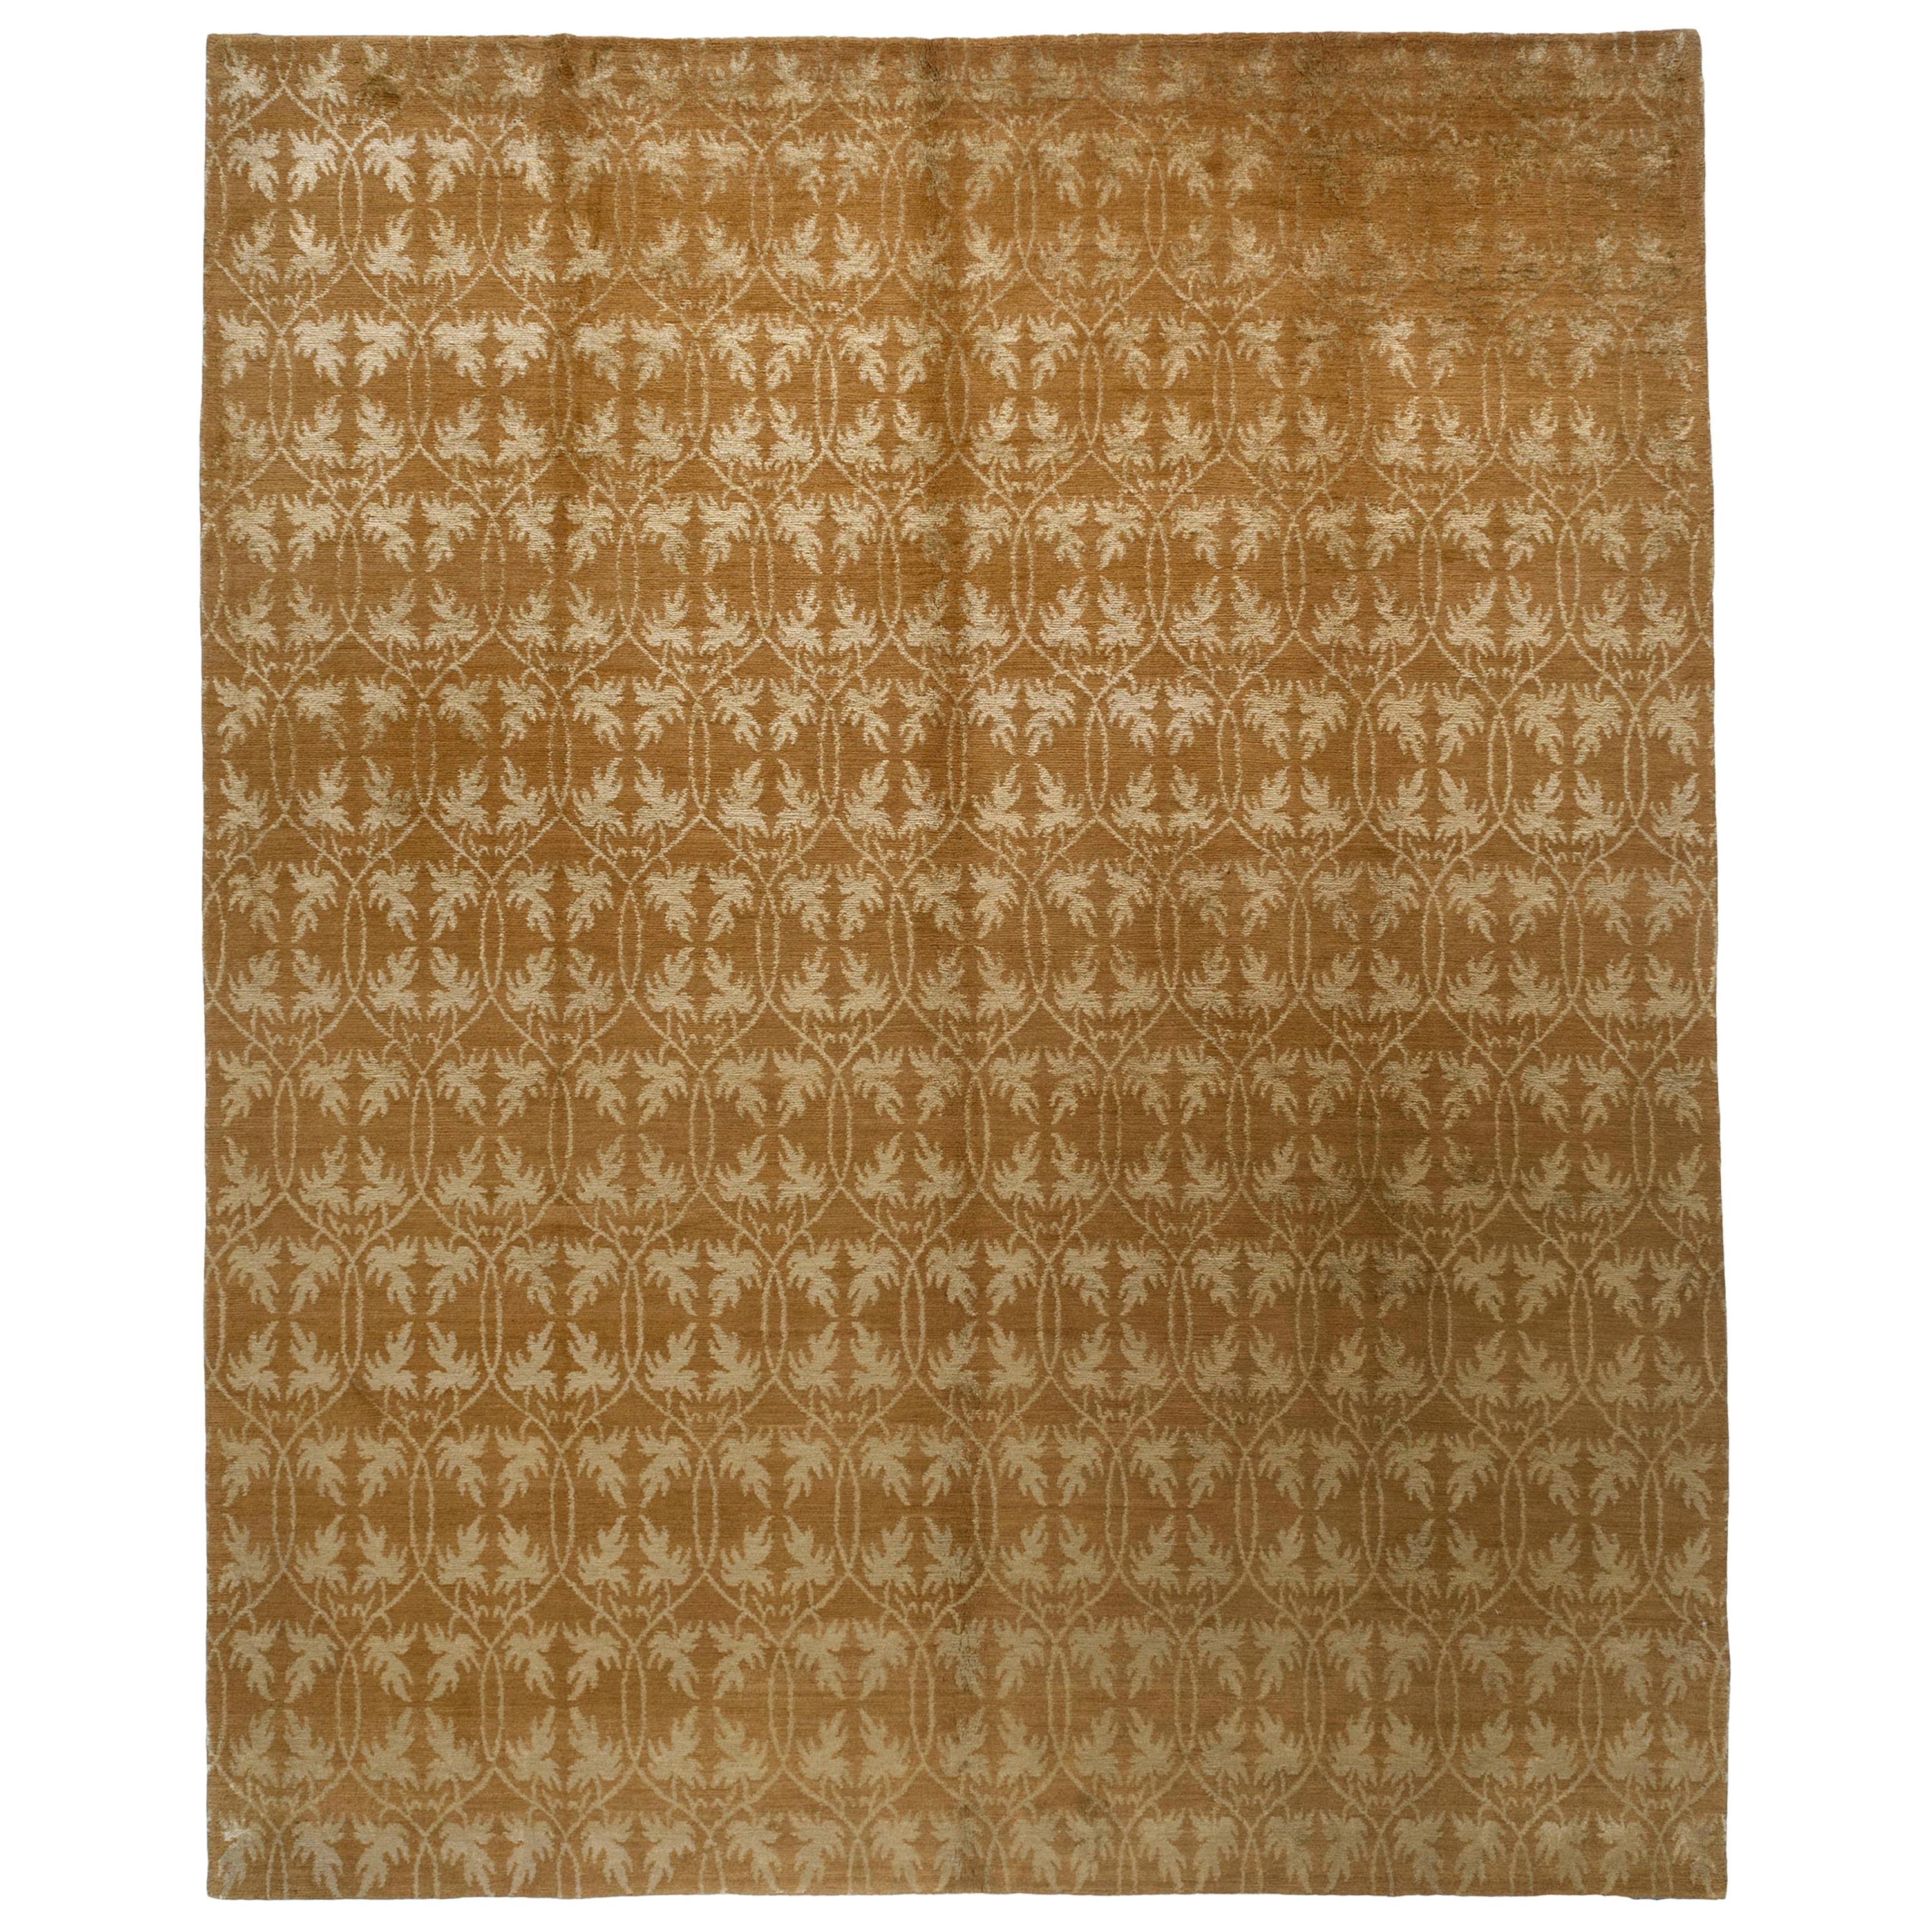 Silver and Gold Floral Area Rug For Sale